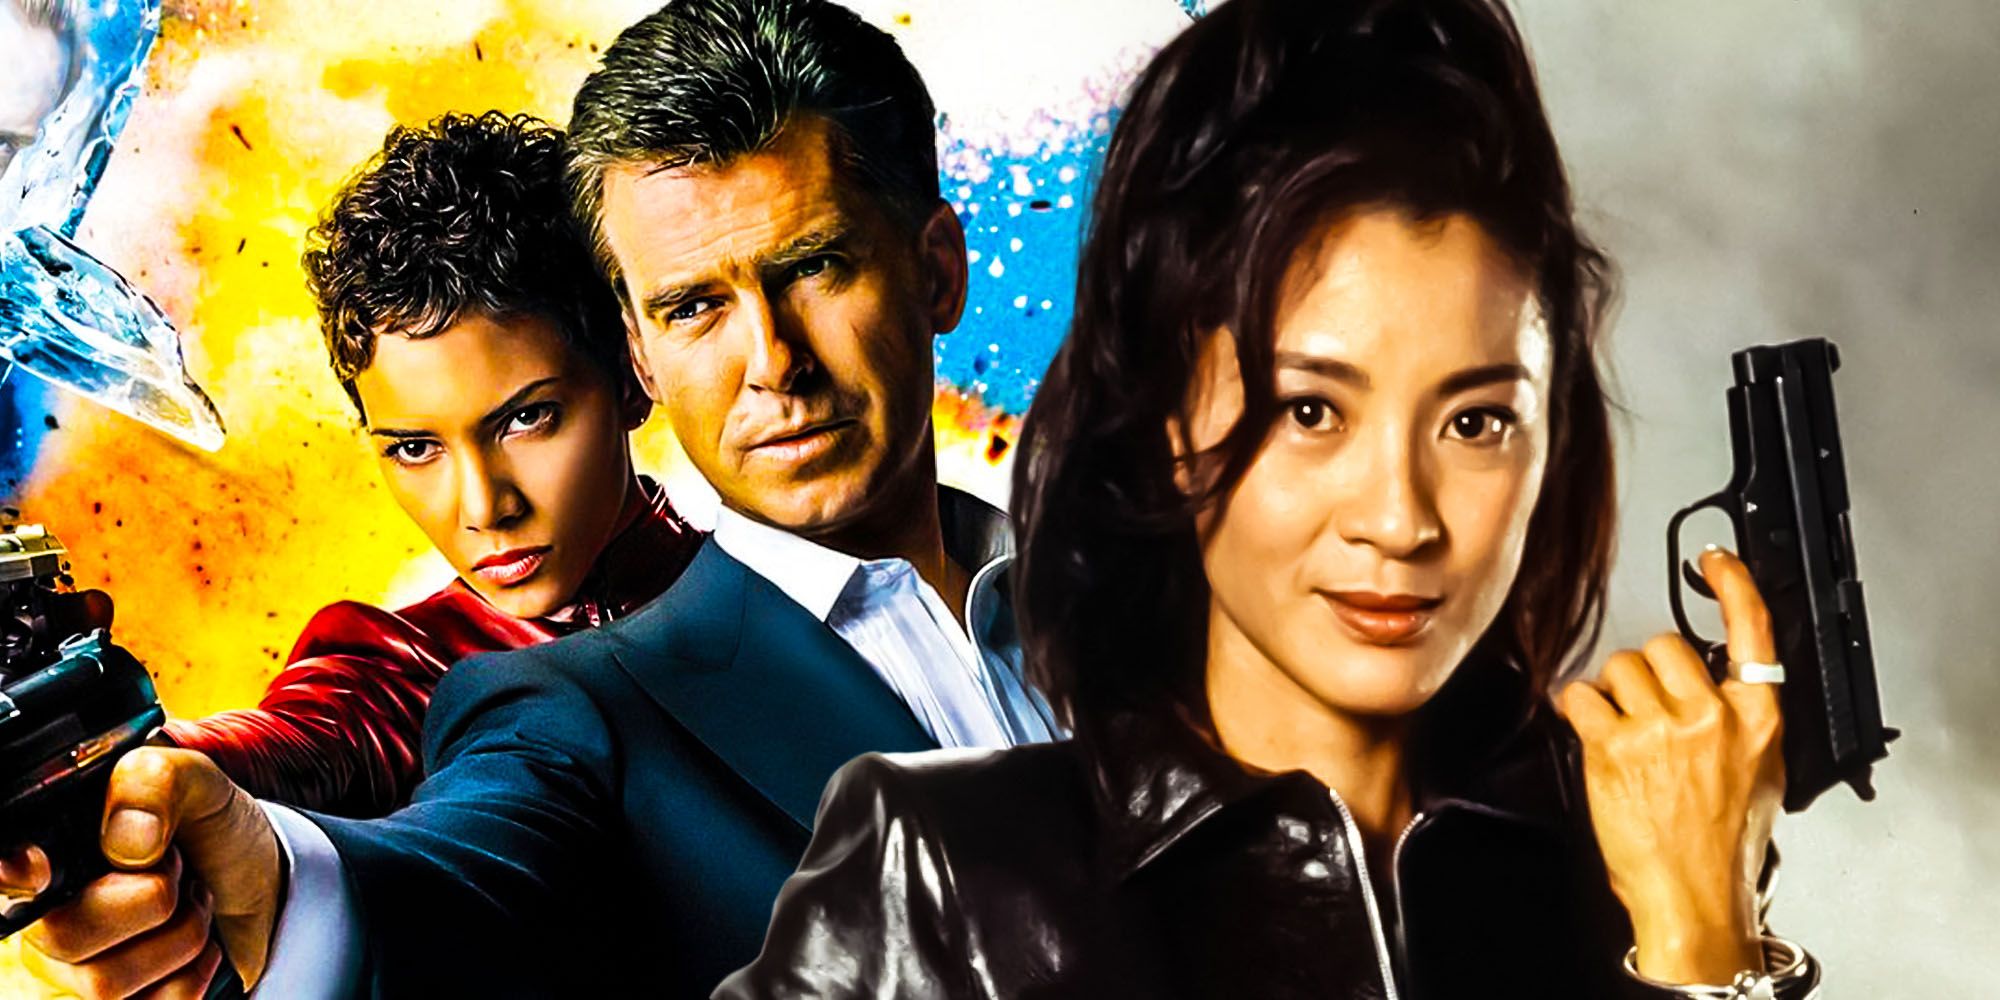 Michelle yeoh Planned Return For Die Another Day